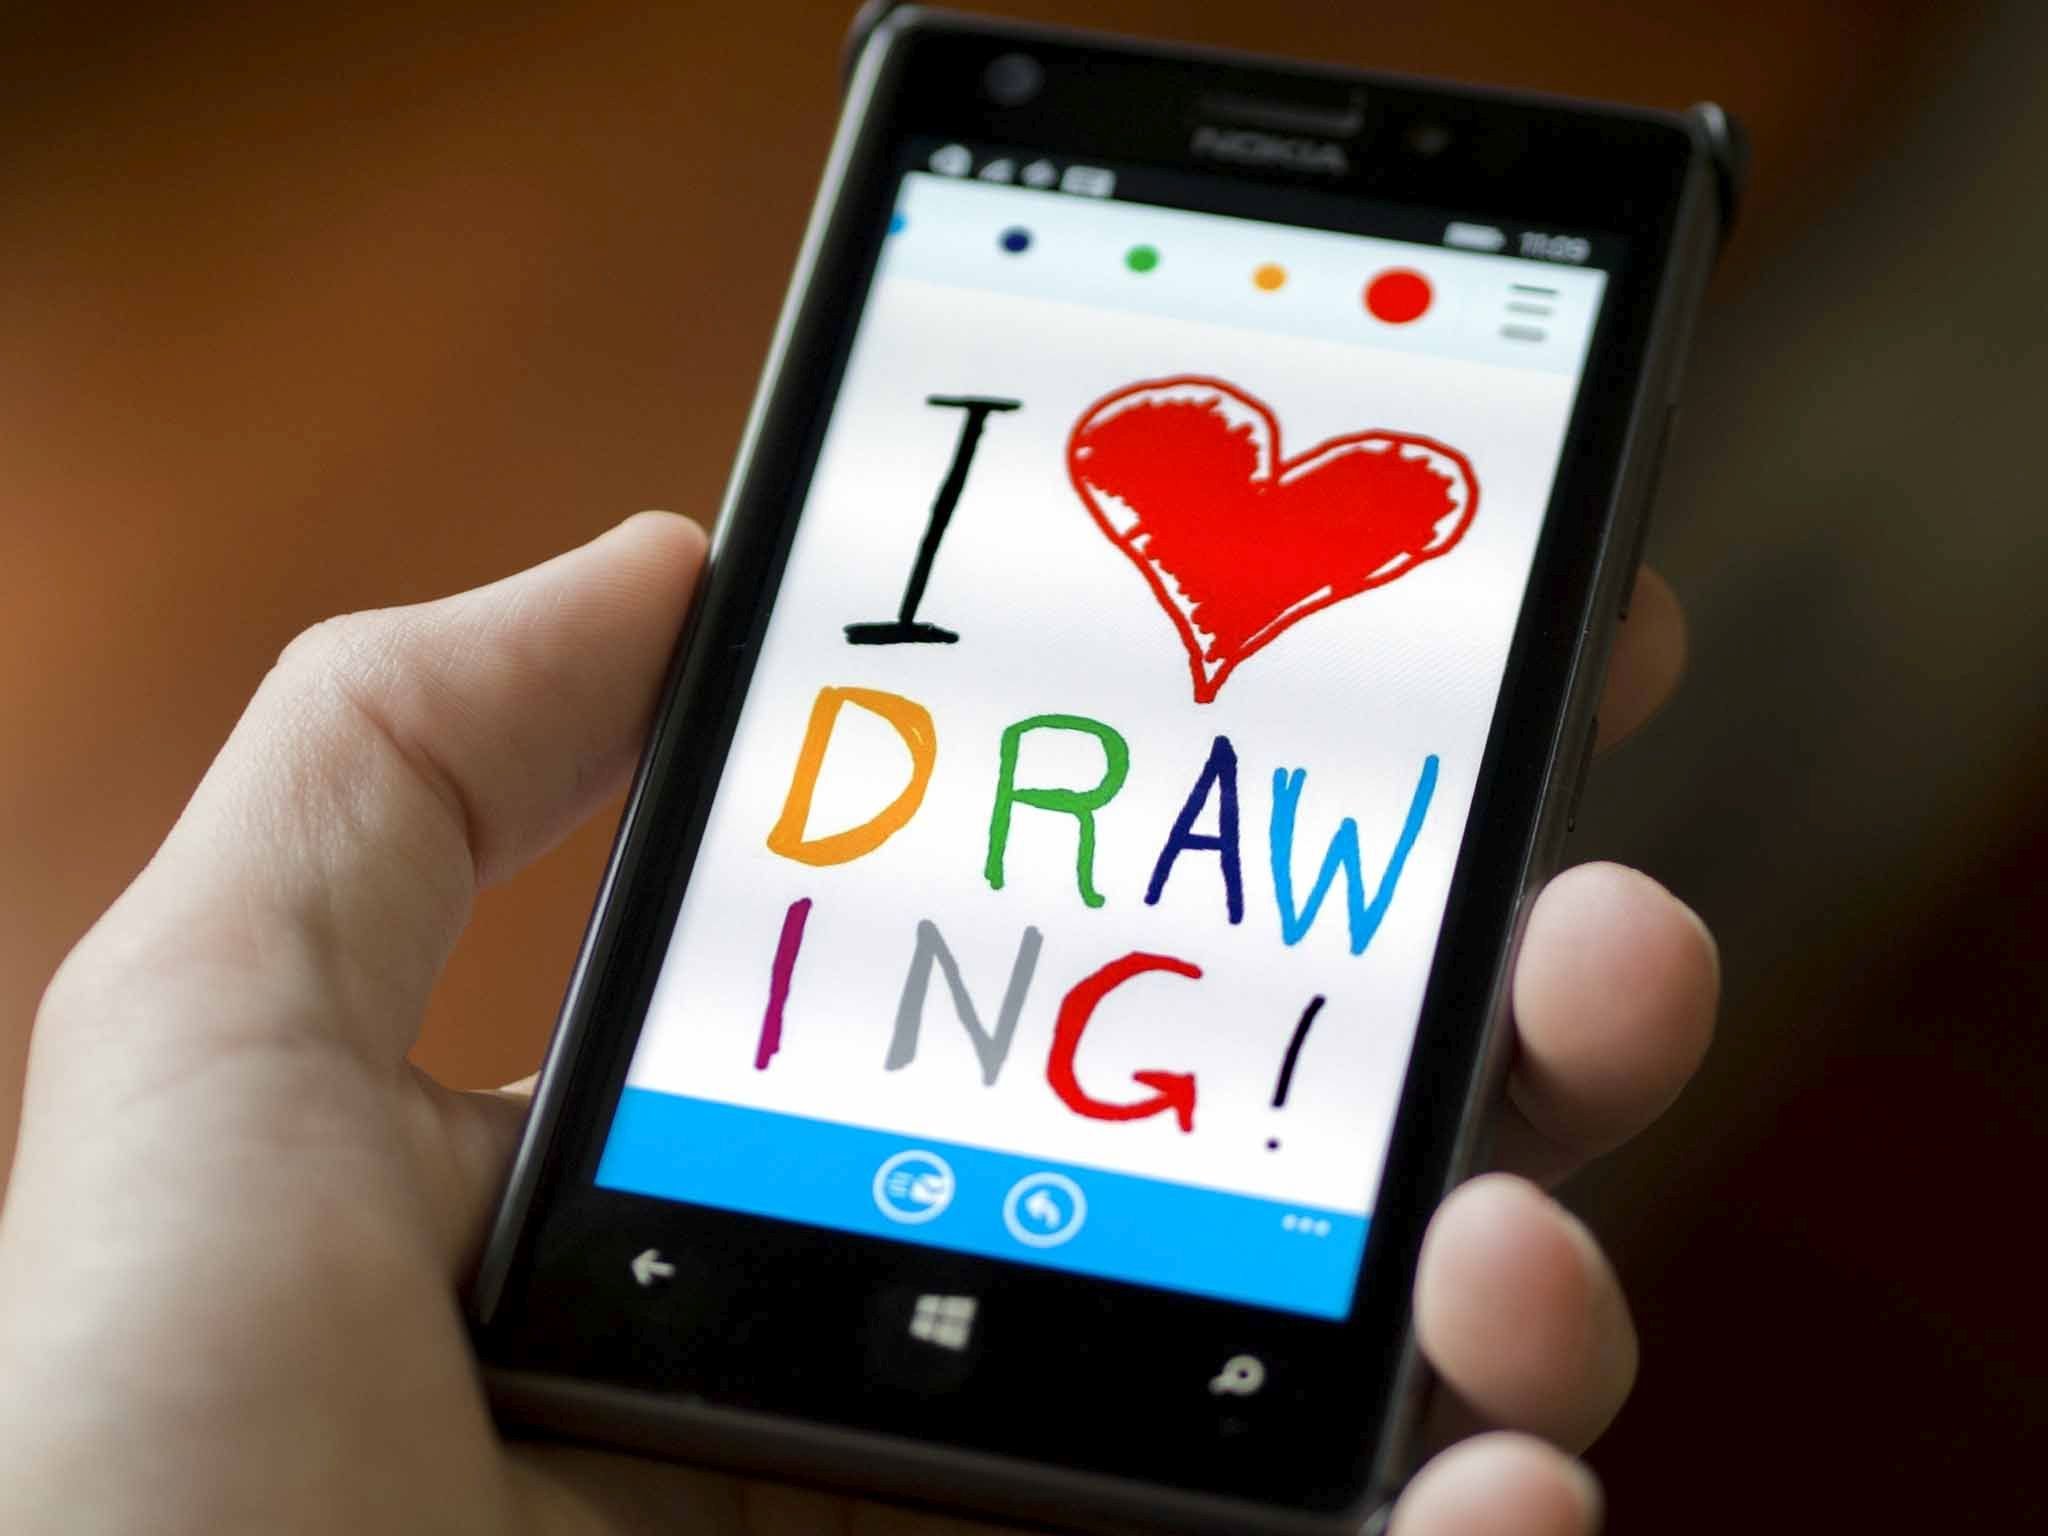 You will be able to draw and doodle on Skype with new 